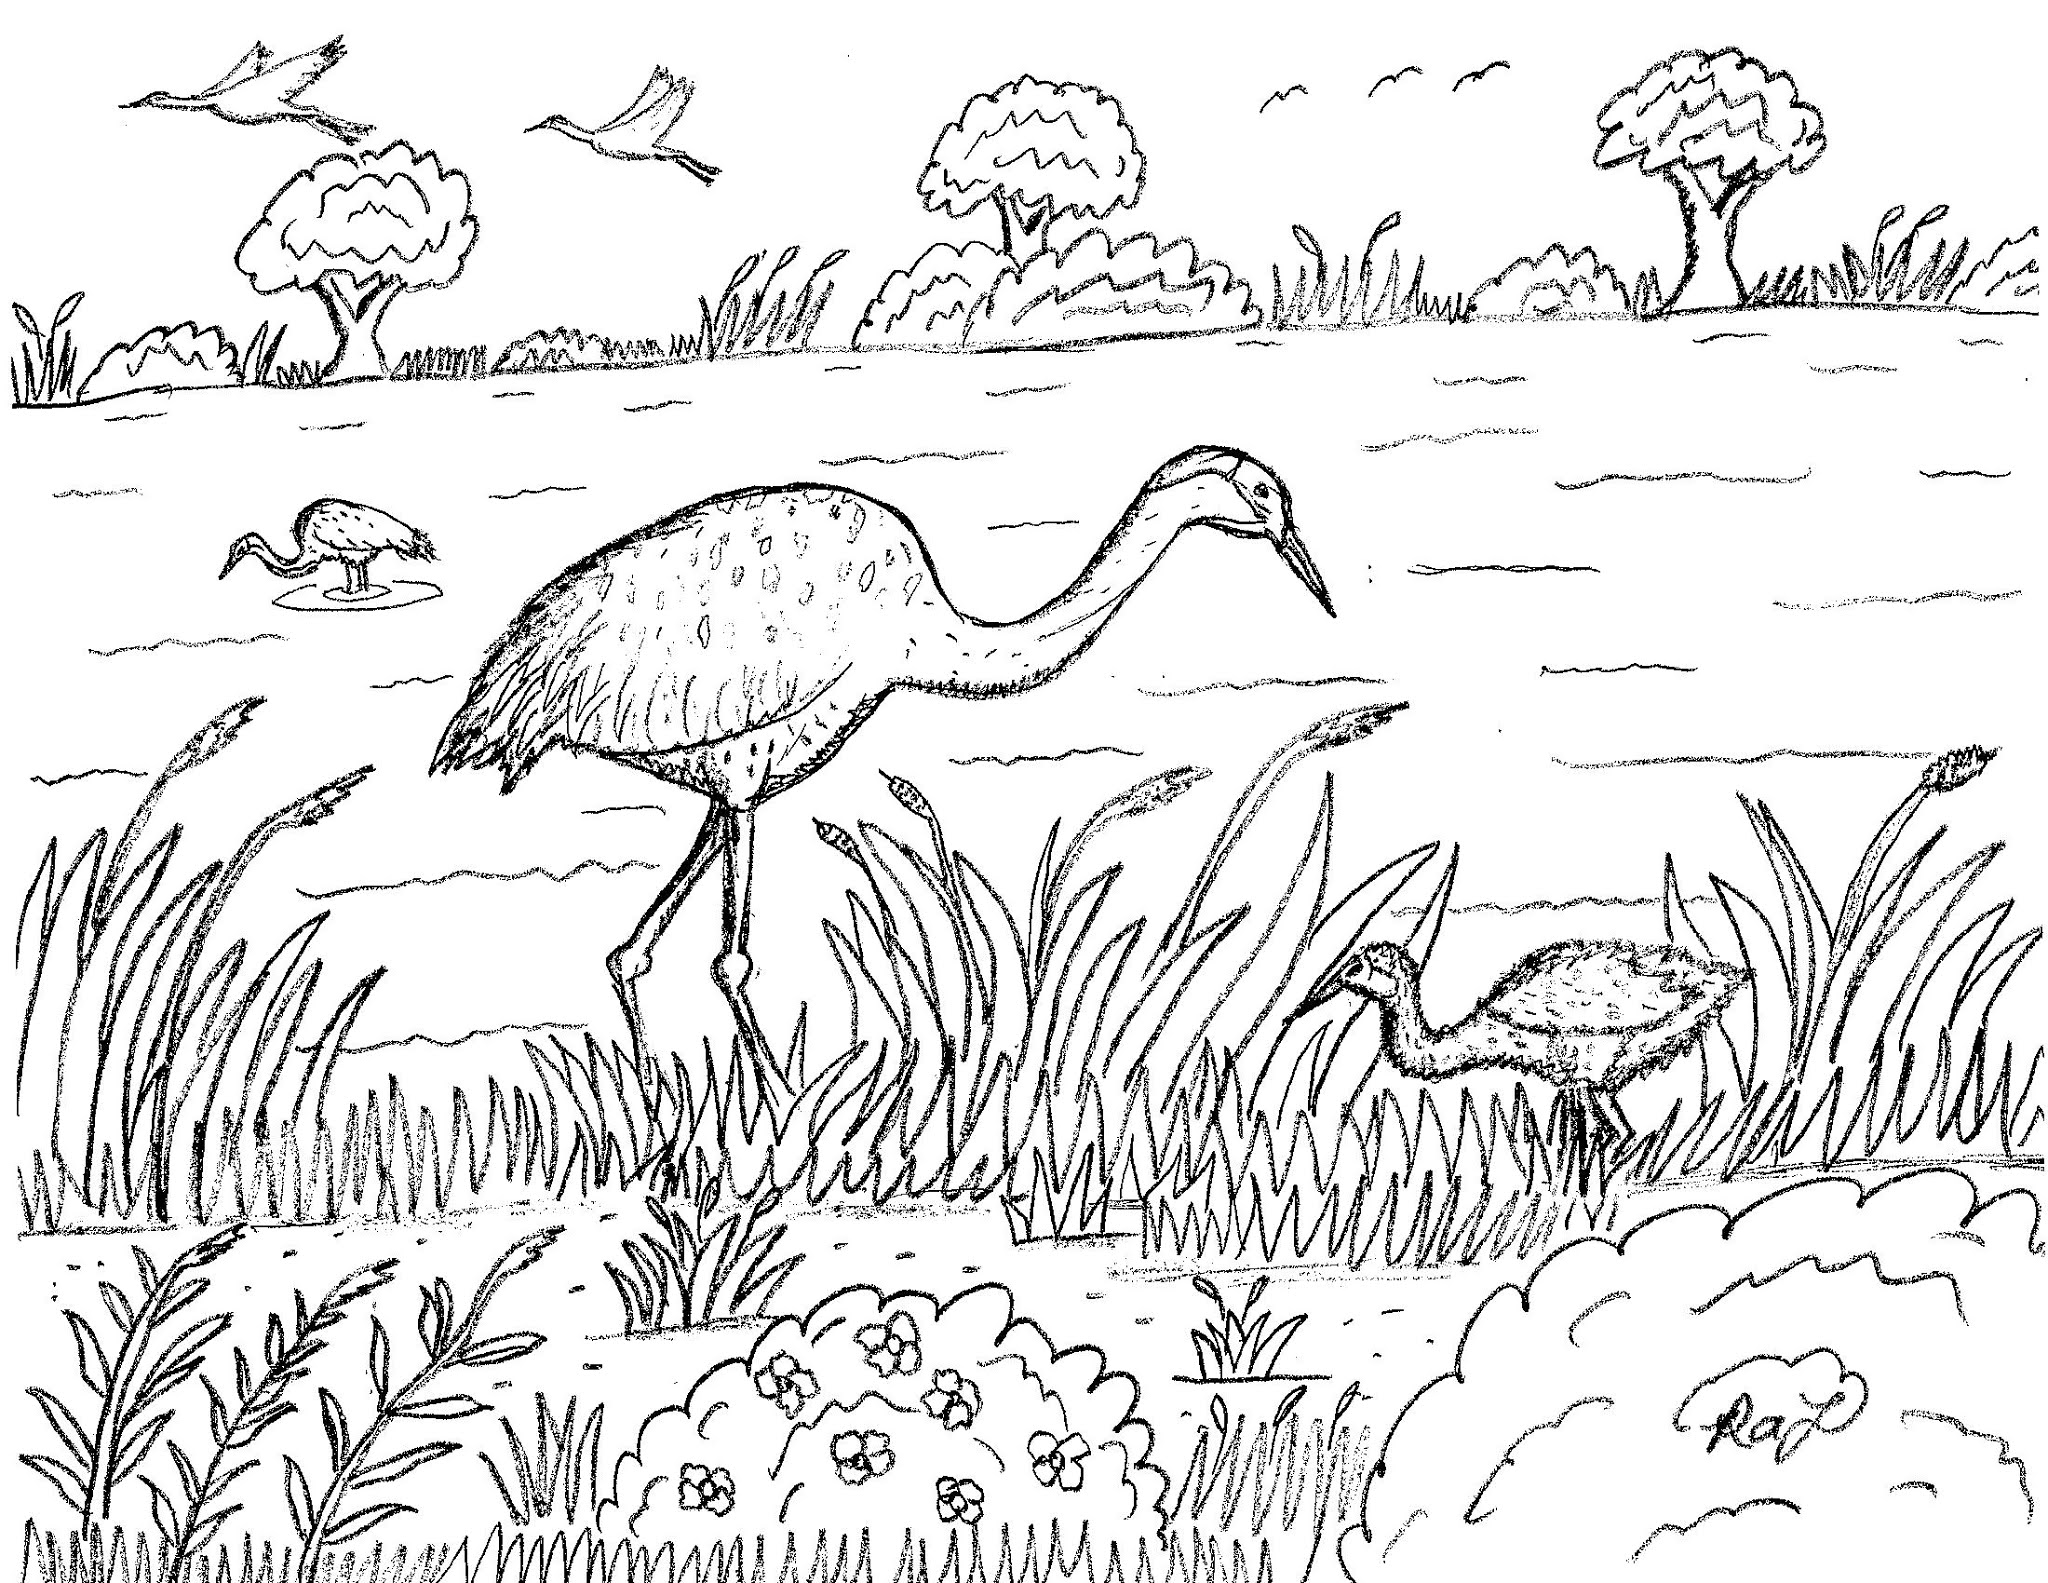 Robin's Great Coloring Pages: Sandhill Cranes coloring page